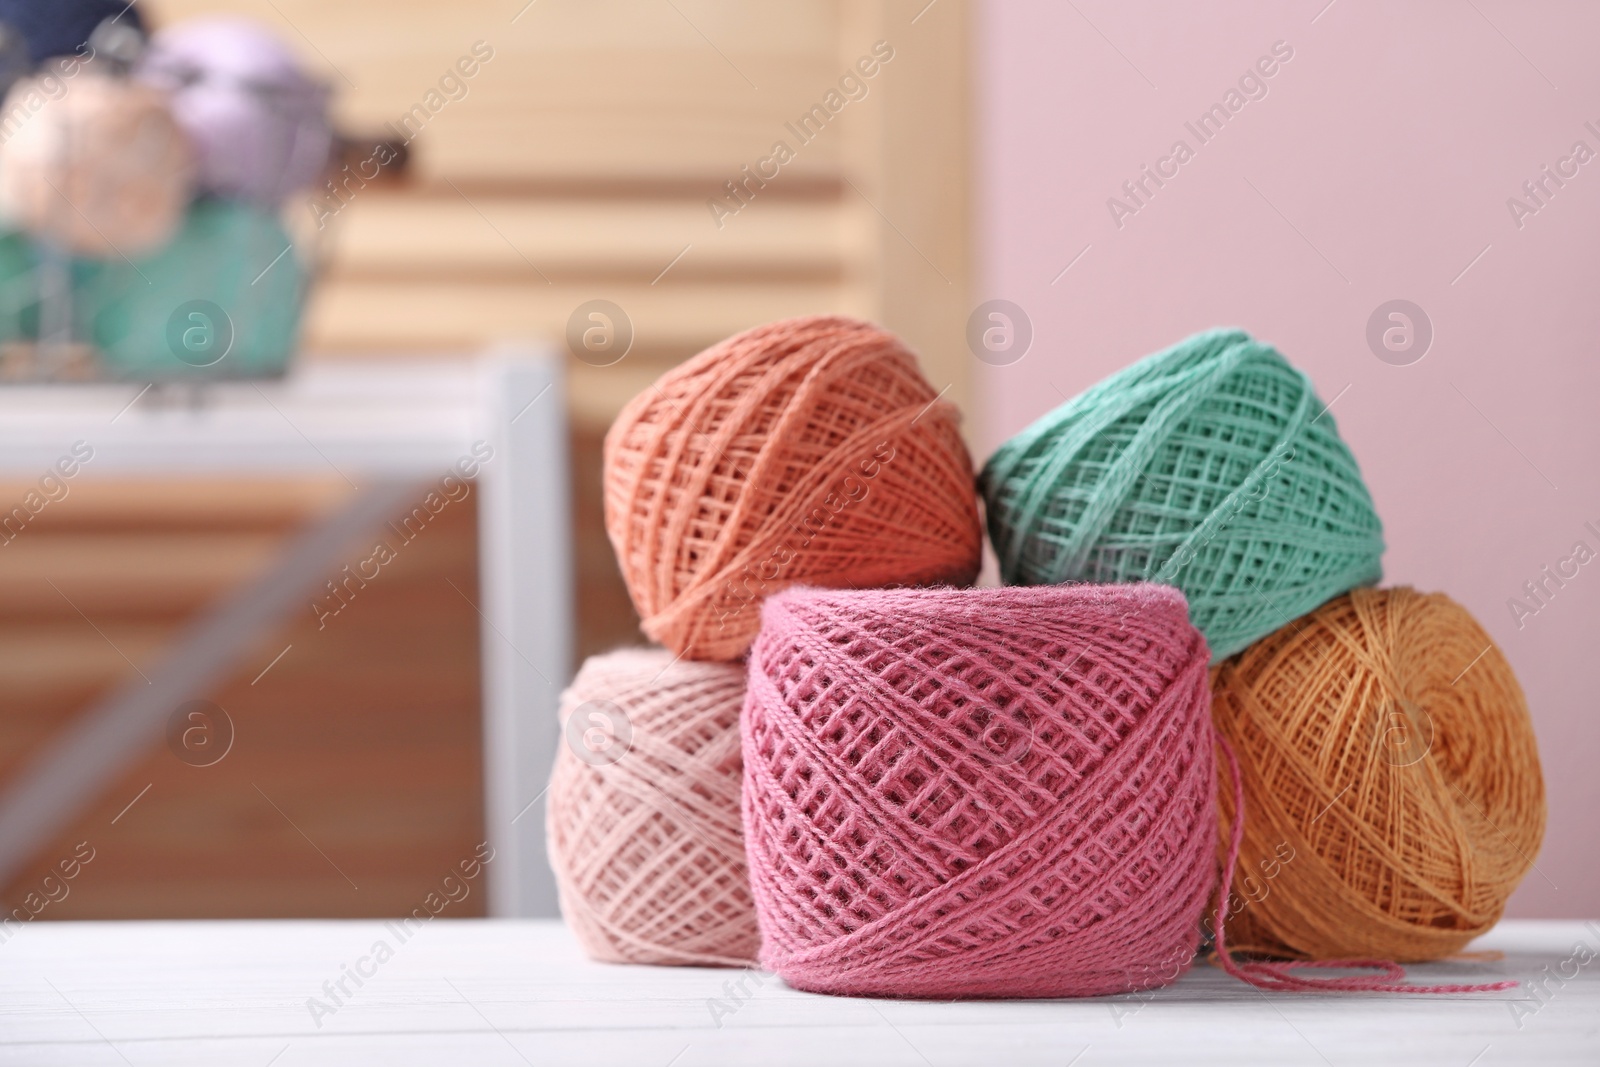 Photo of Colorful clews of threads on table against blurred background, space for text